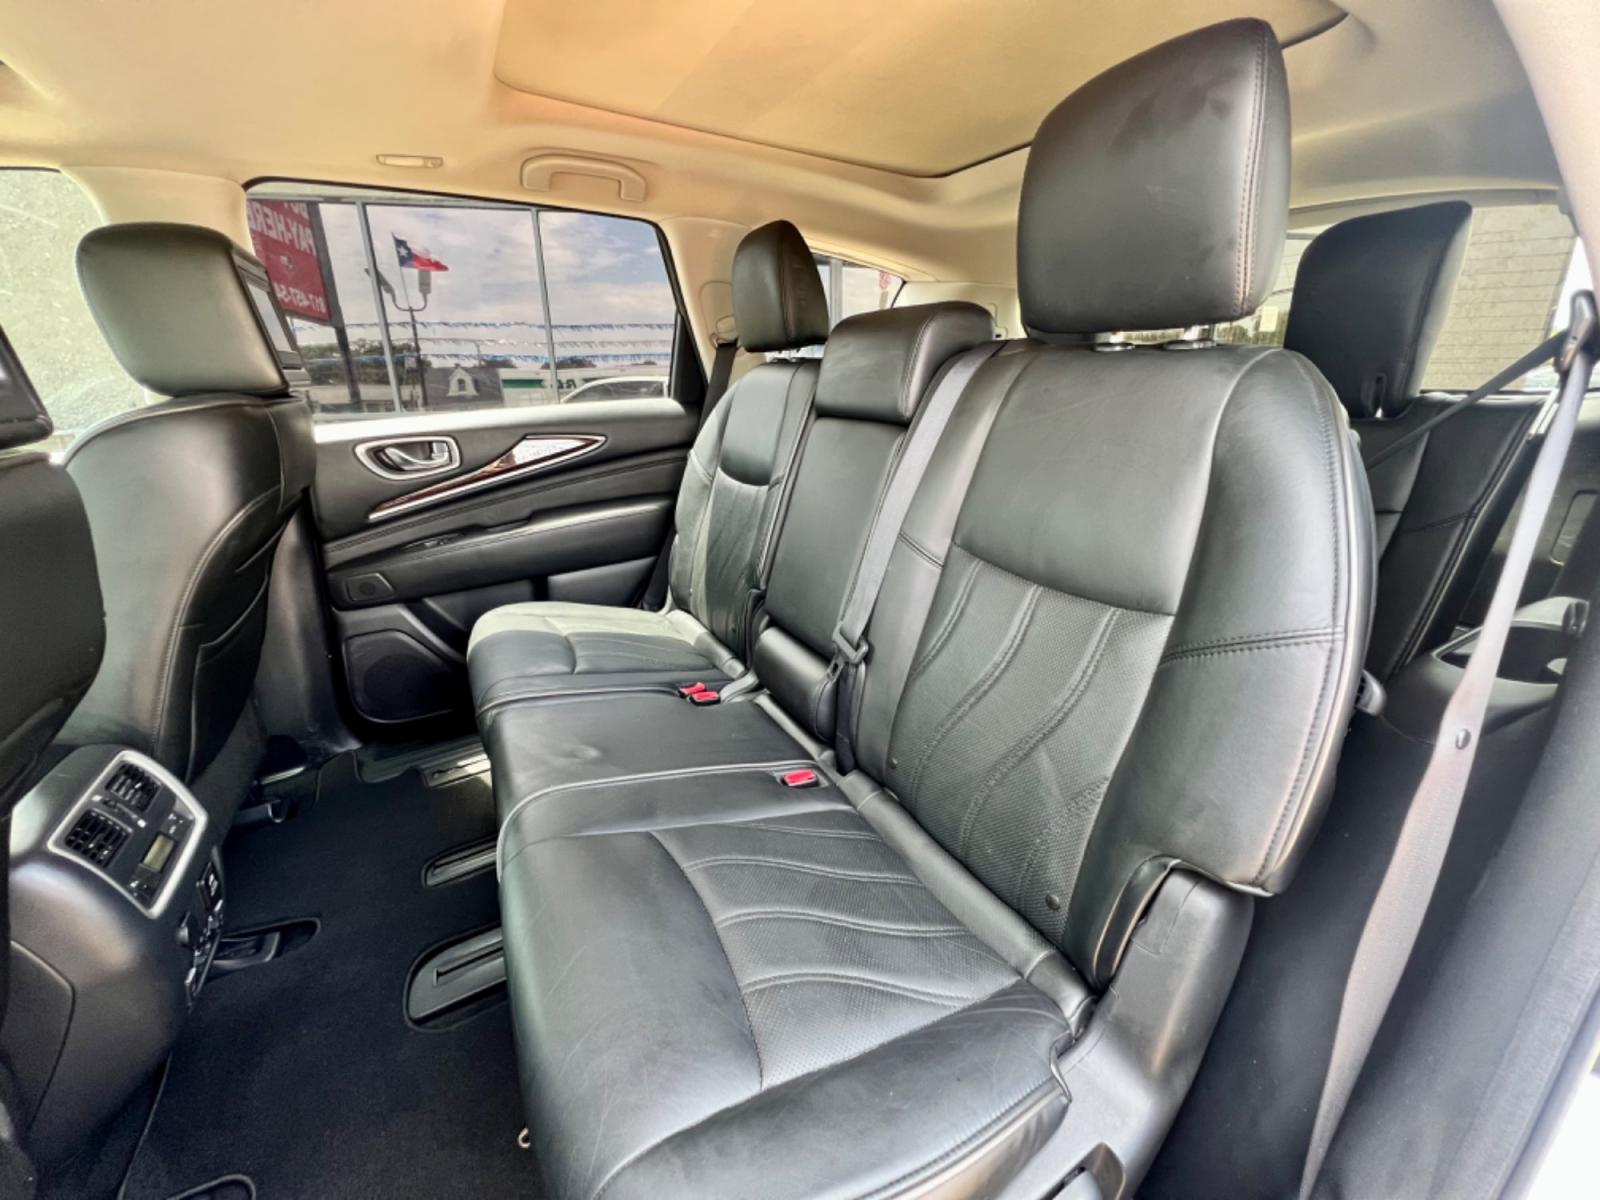 2013 SILVER INFINITI JX35 (5N1AL0MM3DC) , located at 5900 E. Lancaster Ave., Fort Worth, TX, 76112, (817) 457-5456, 0.000000, 0.000000 - This is a 2013 INFINITI JX35 4 DOOR SUV that is in excellent condition. There are no dents or scratches. The interior is clean with no rips or tears or stains. All power windows, door locks and seats. Ice cold AC for those hot Texas summer days. It is equipped with a CD player, AM/FM radio, AUX port - Photo #12